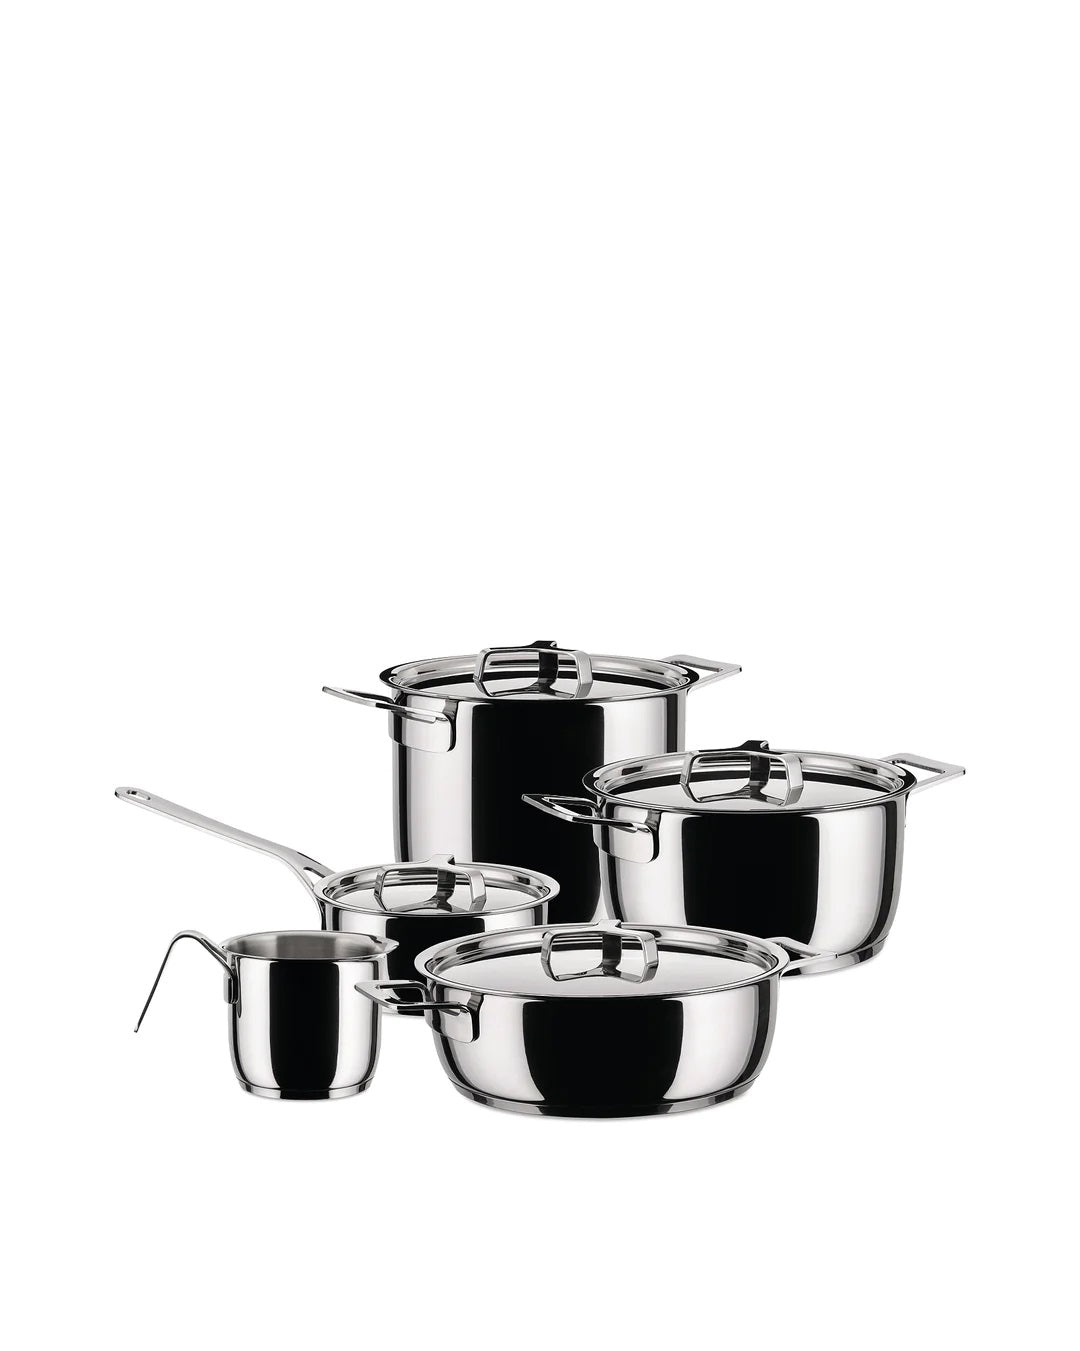 Alessi Pots &amp; Pans Set of 9 saucepans with lid, Stainless steel